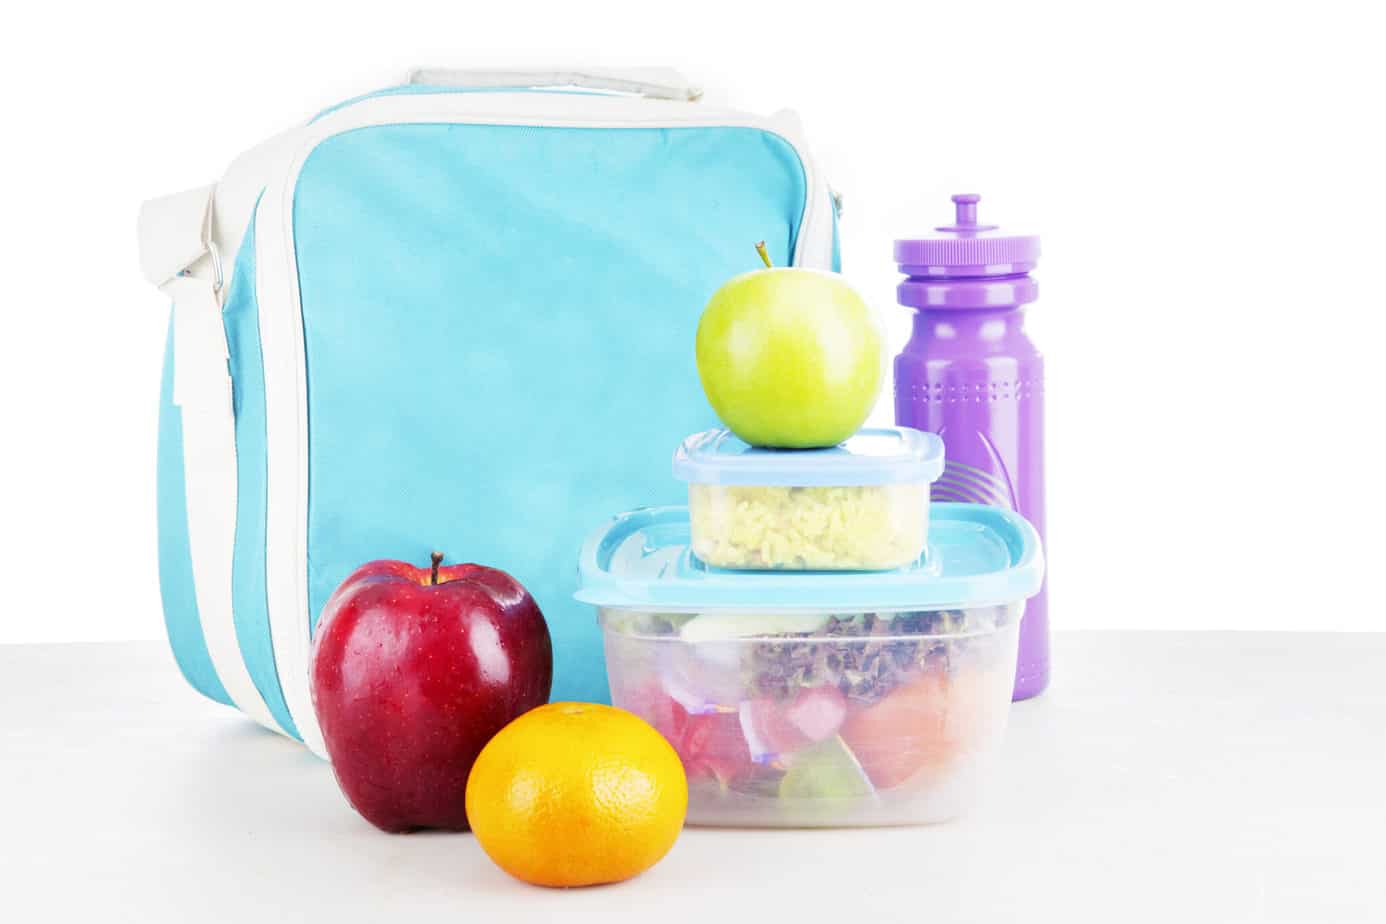 How to Get Your Kids to Pack Their Own Lunch